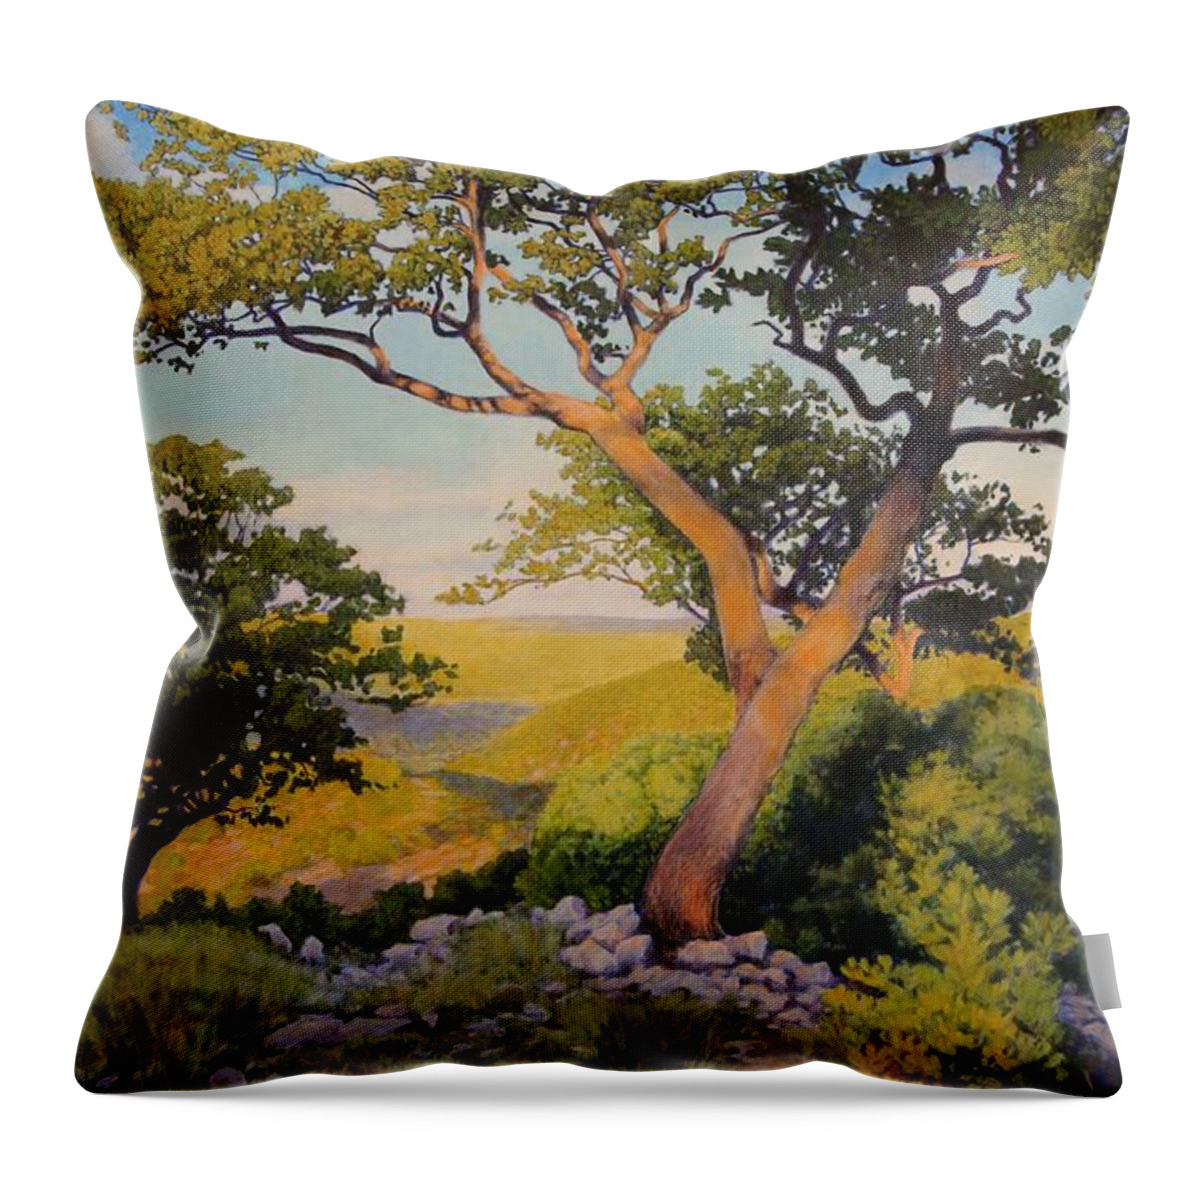 Hill Throw Pillow featuring the painting The Witches on The Hill by Andrew Danielsen